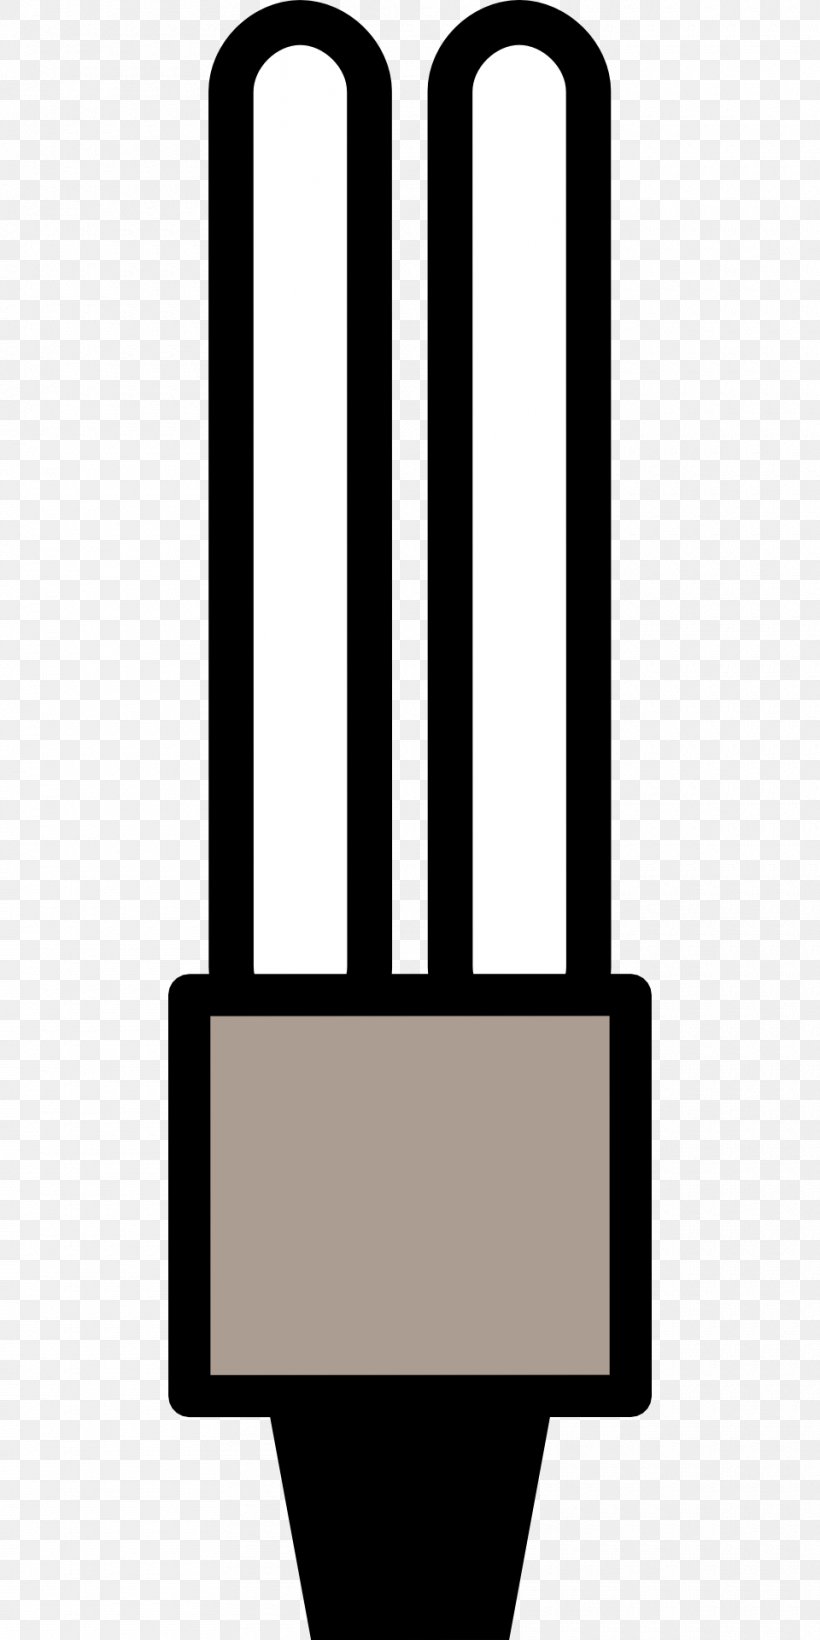 Incandescent Light Bulb Foco Compact Fluorescent Lamp Drawing, PNG, 960x1920px, Light, Child, Coloring Book, Compact Fluorescent Lamp, Consumption Download Free